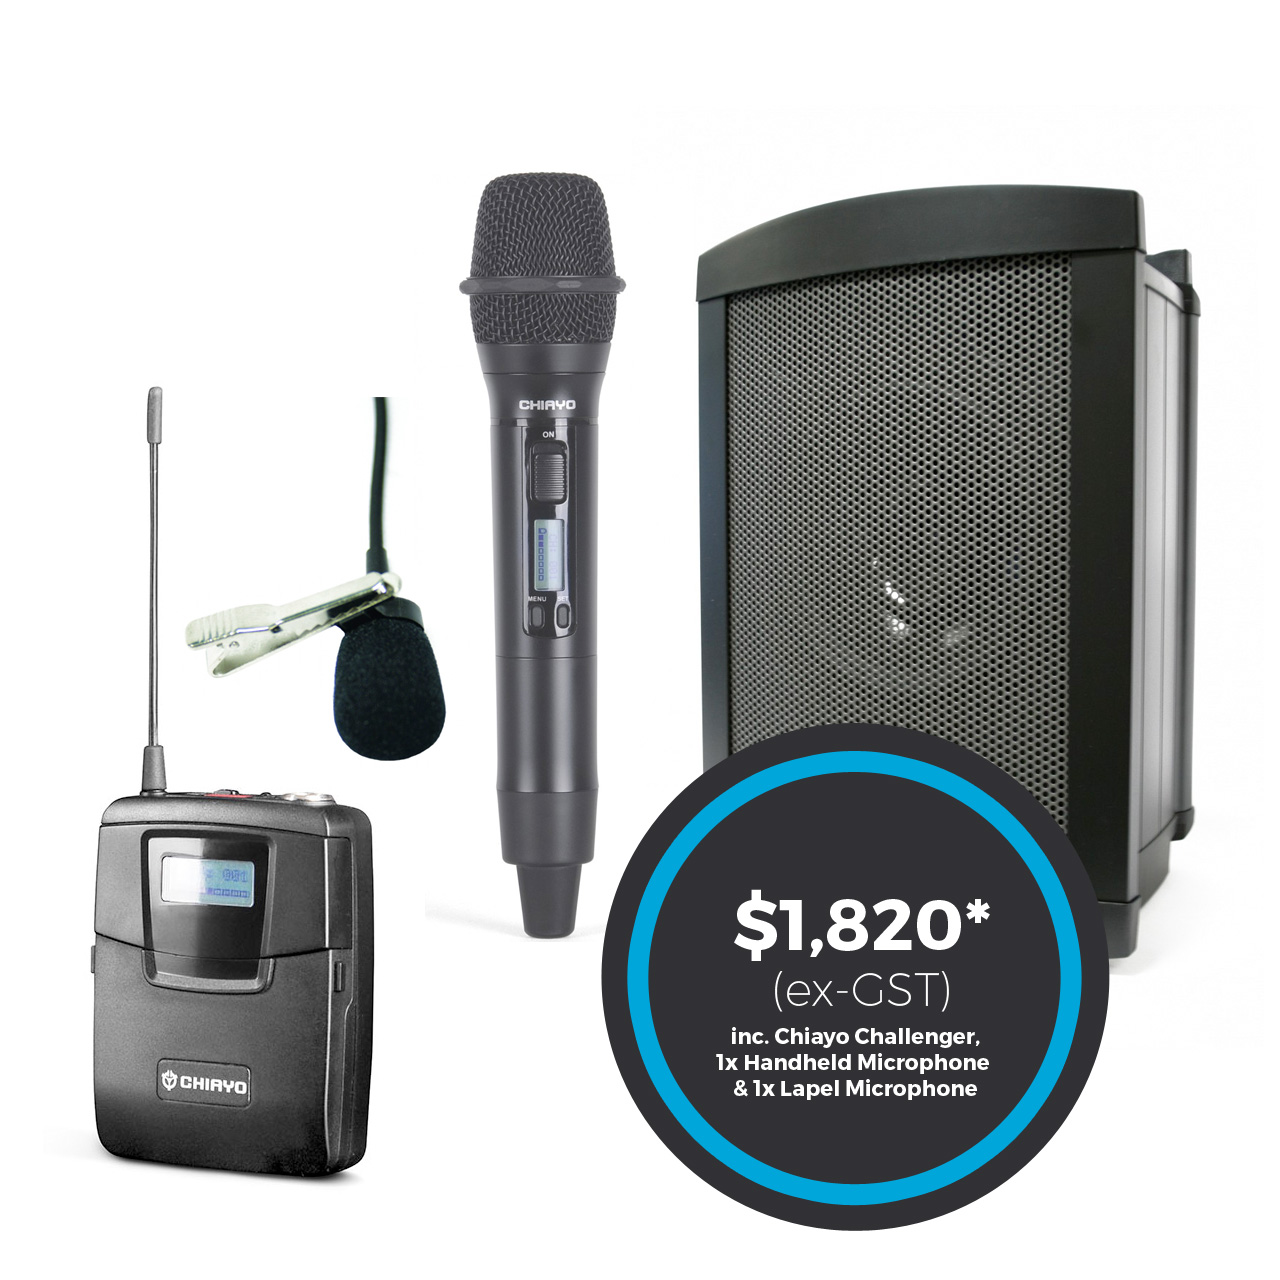 chiayo portable pa systems-wireless microphone melbourne